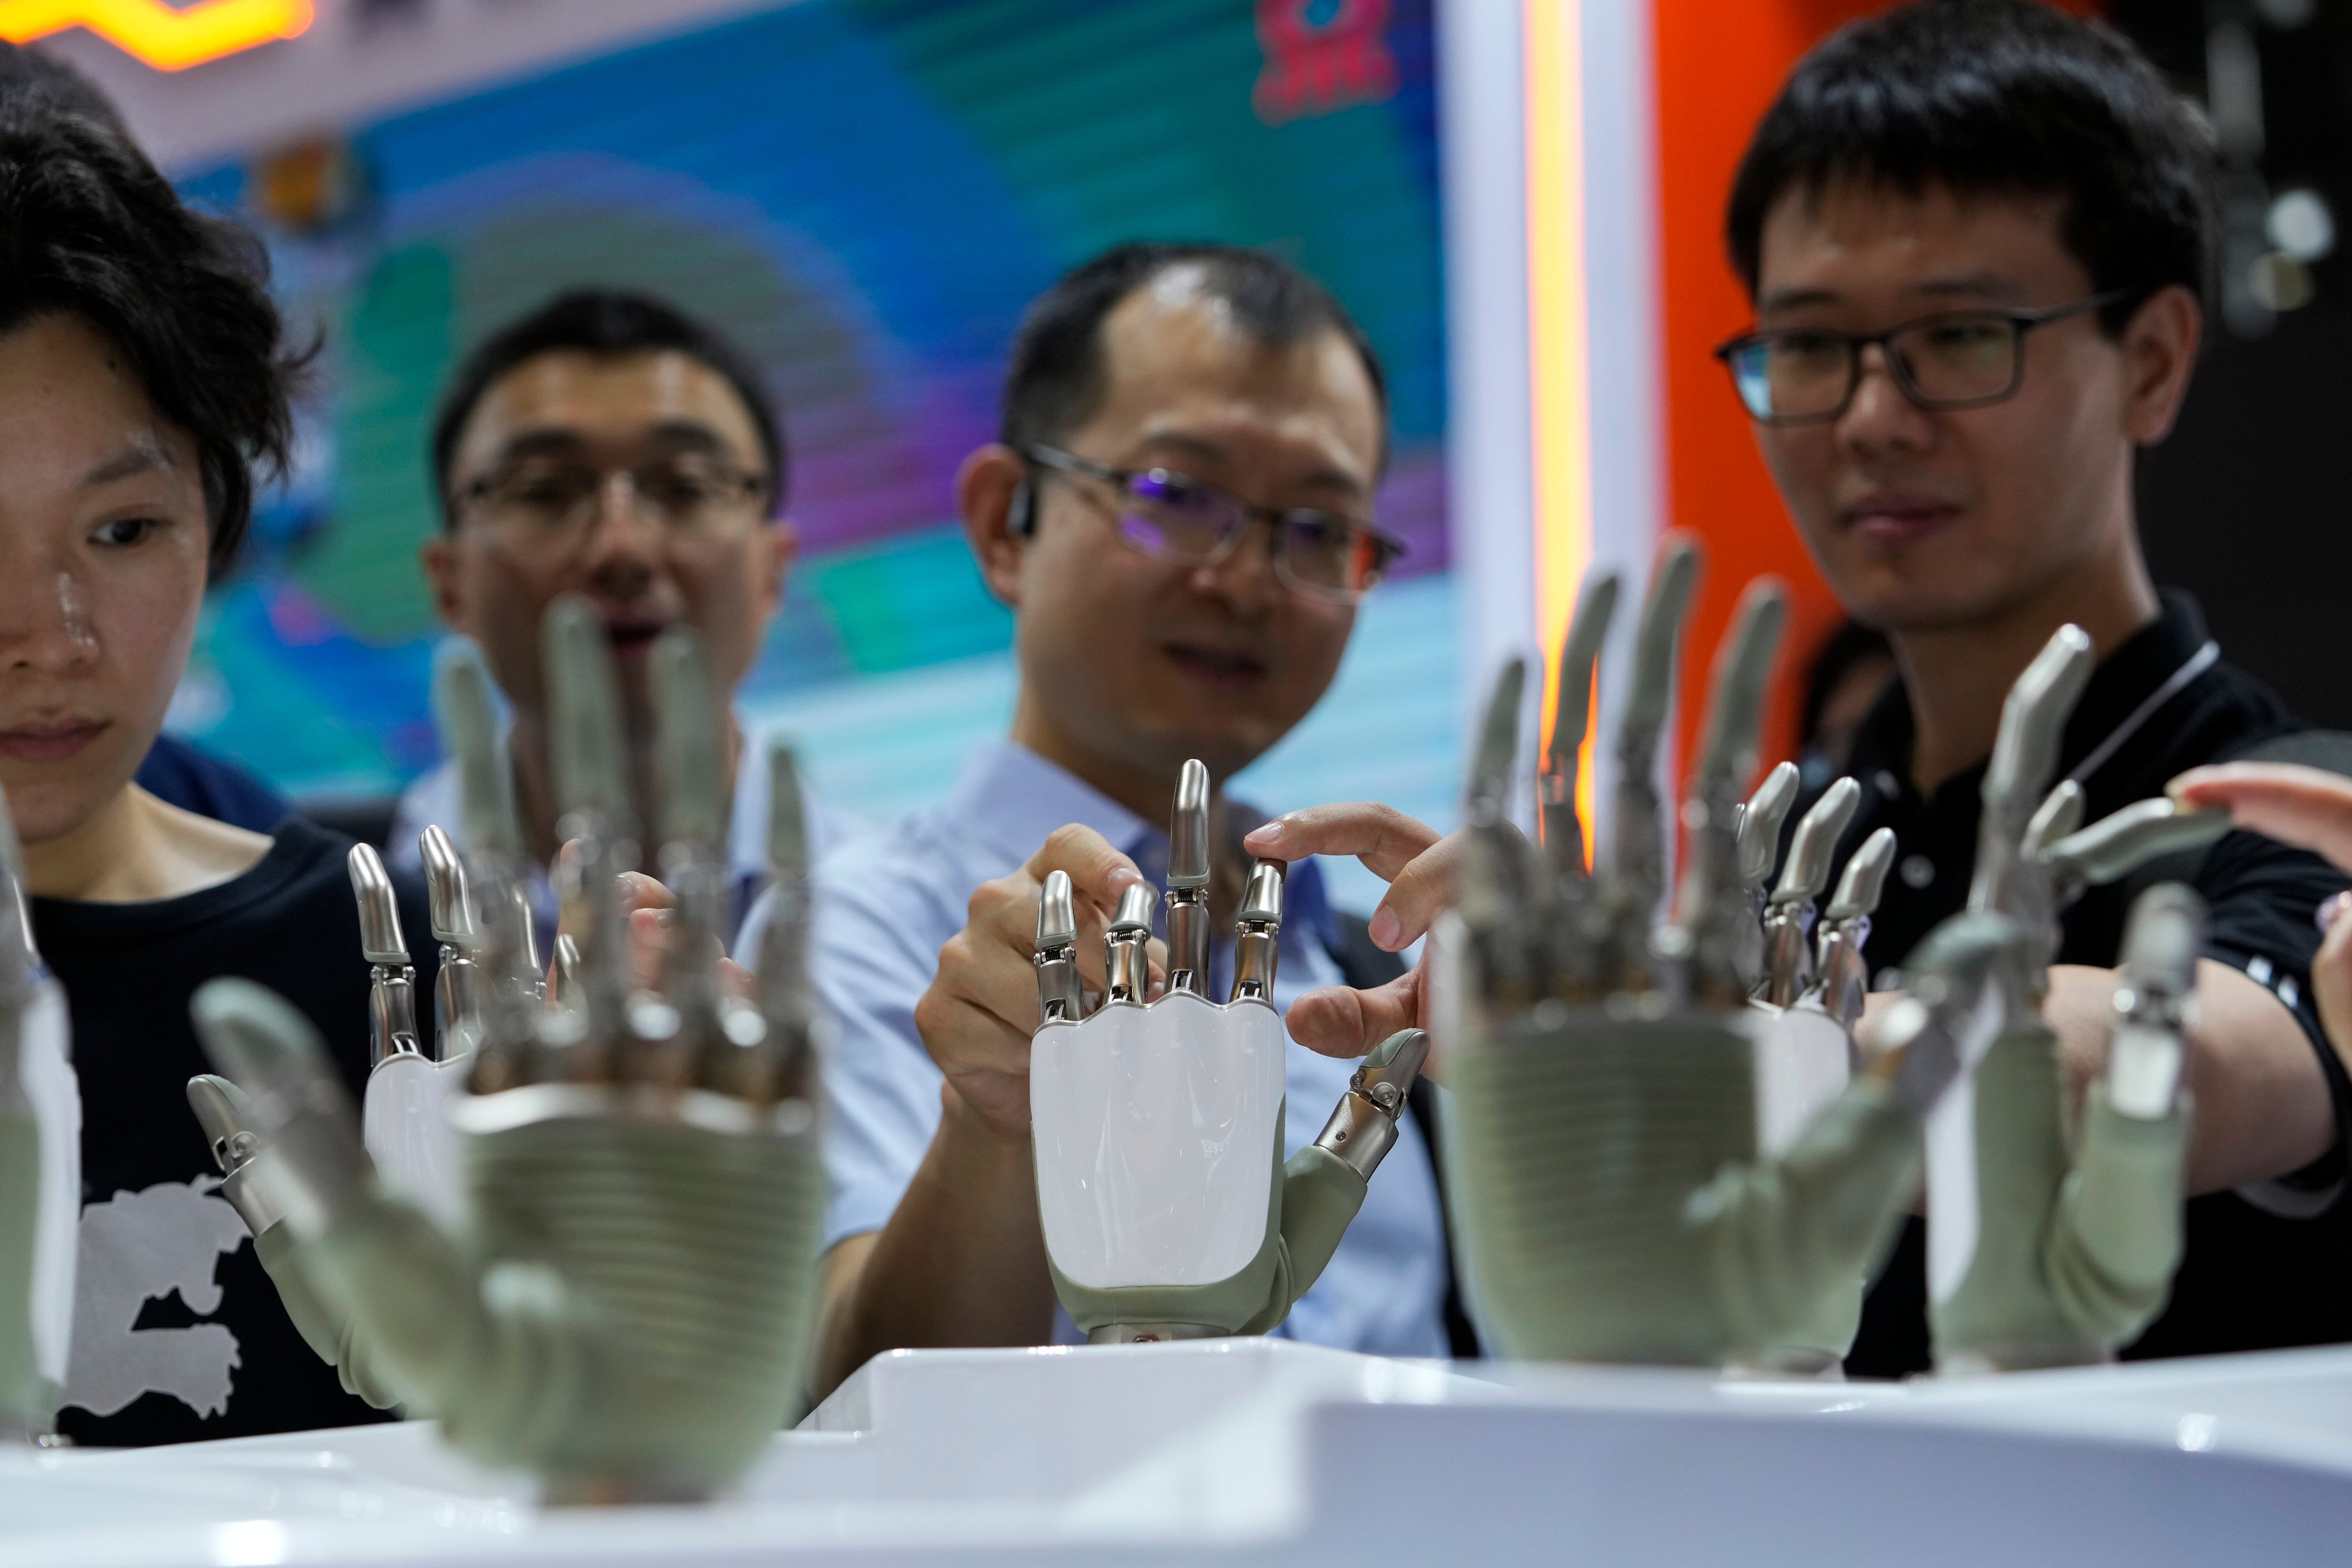 Visitors touch humanoid robot hands on display at the World Artificial Intelligence Conference in Shanghai. Photo: AP